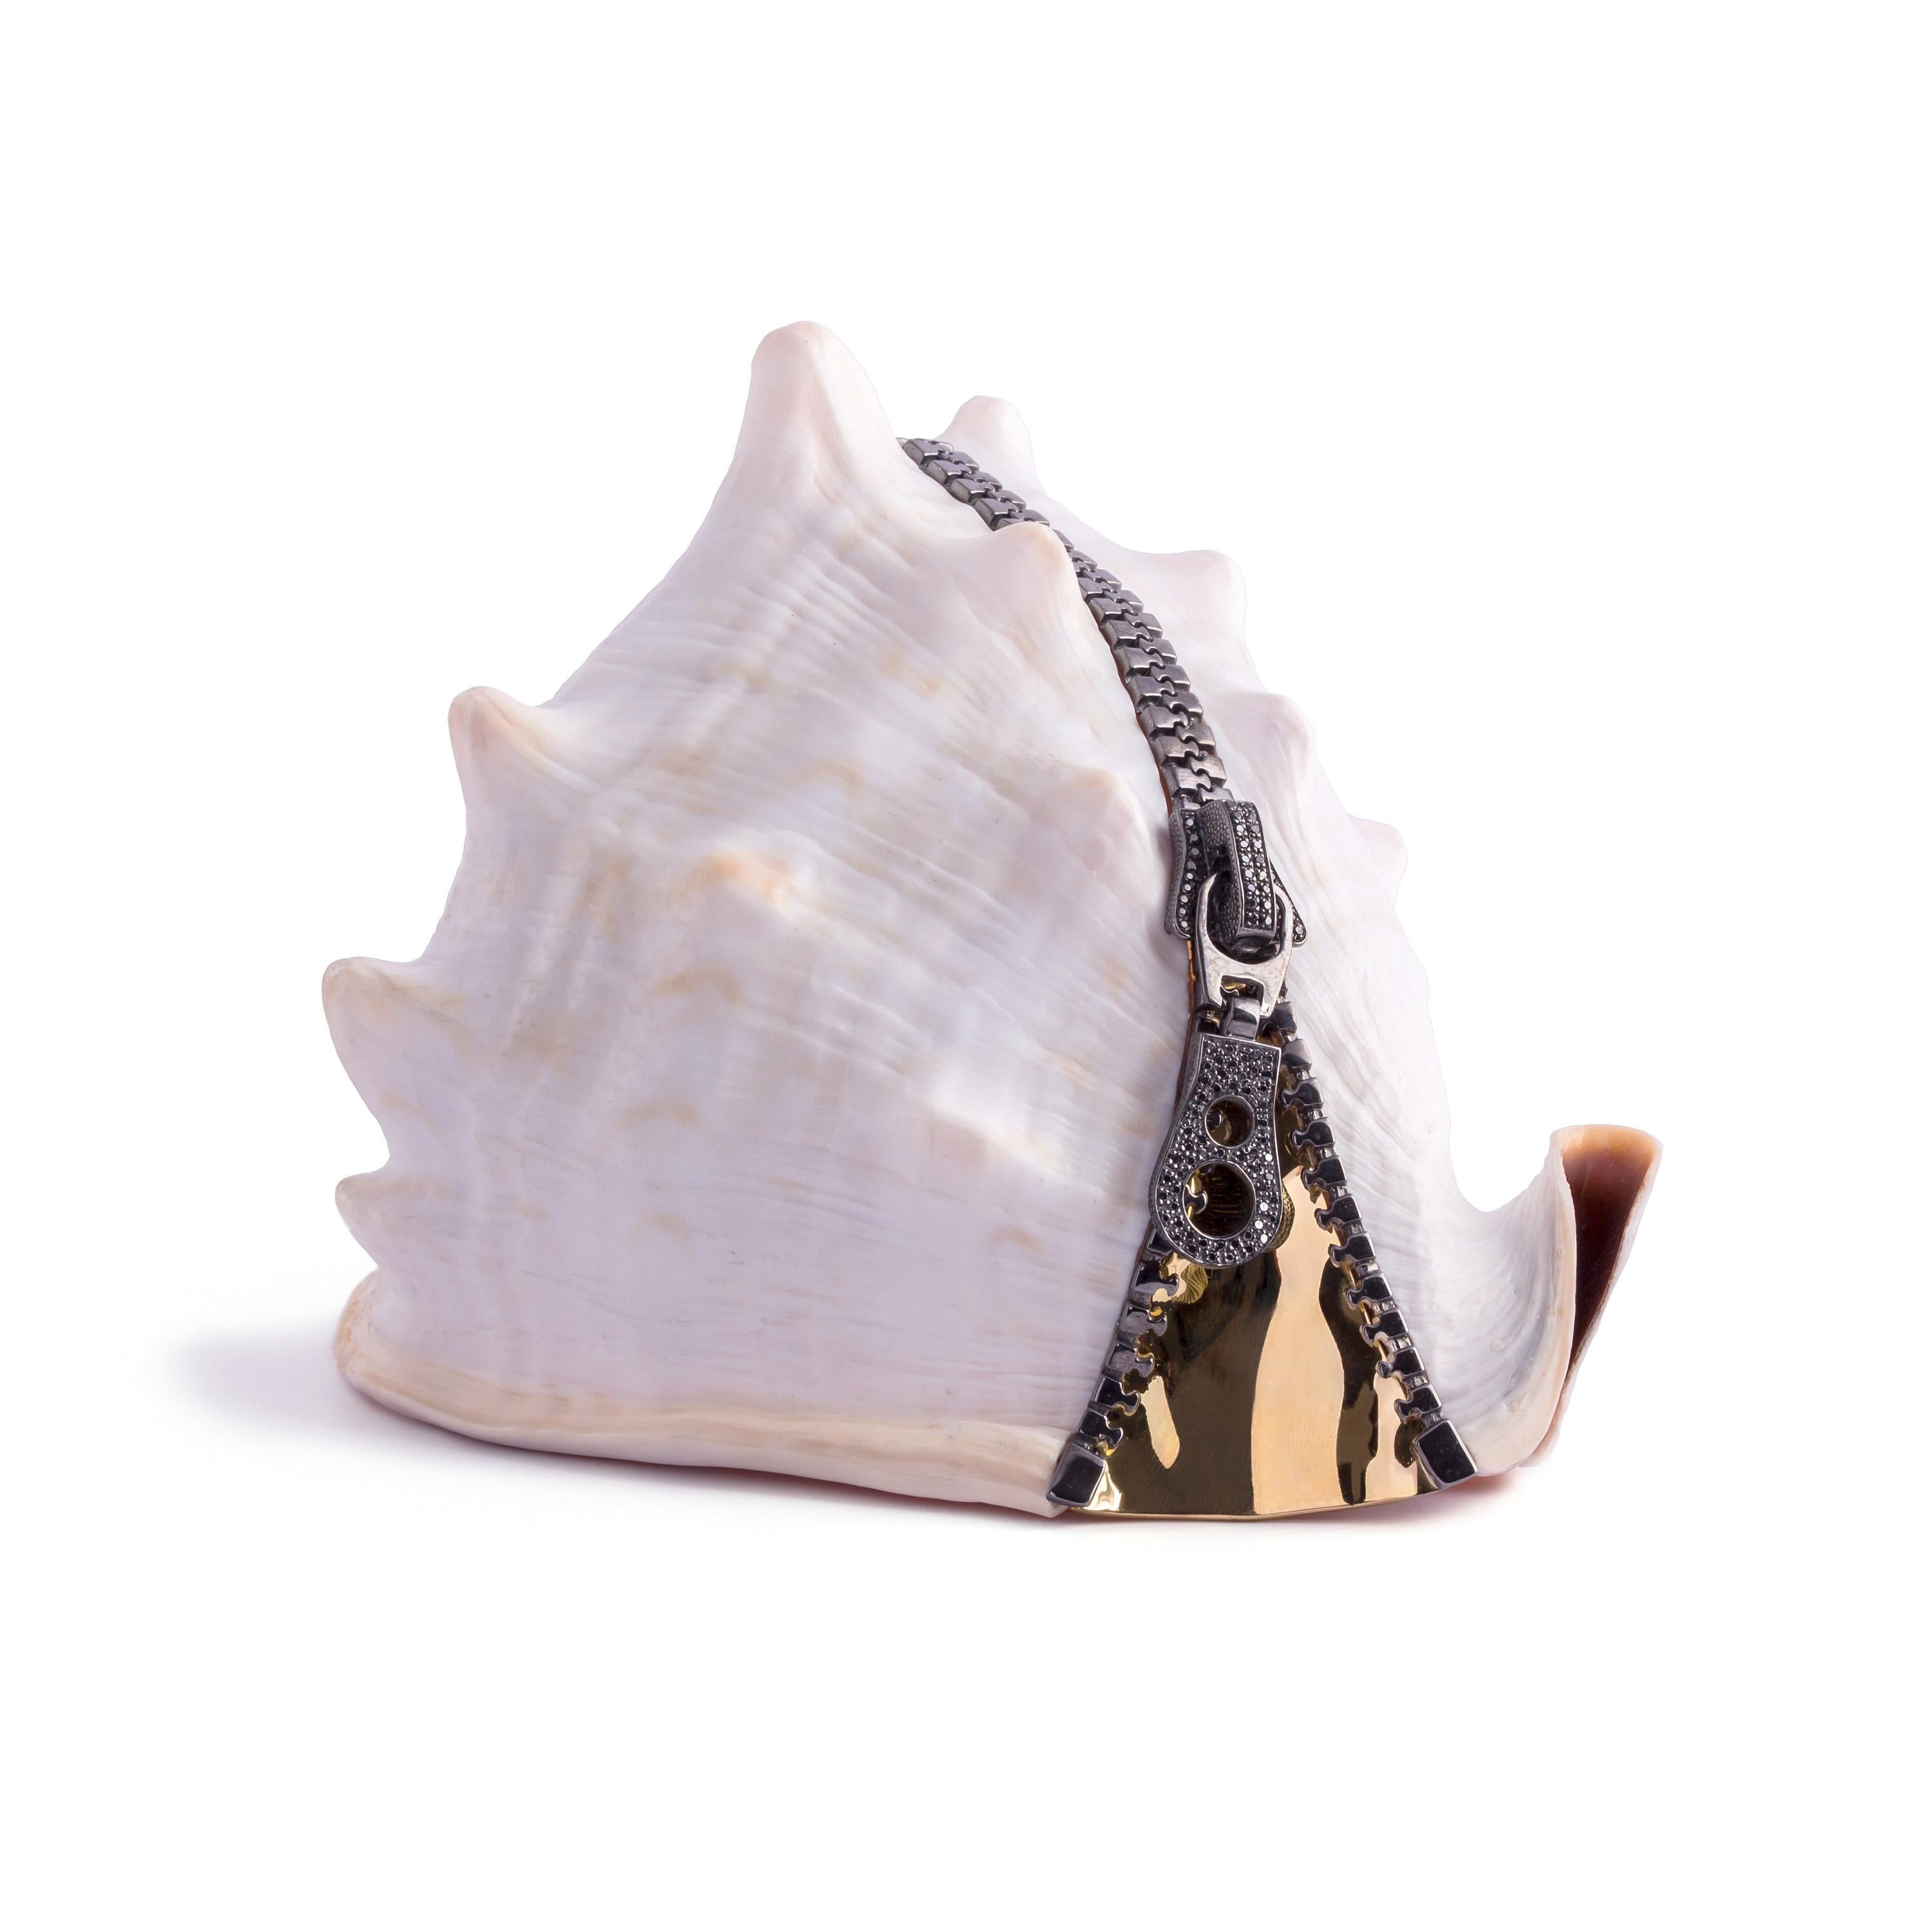 This is a one-of-a-kind hand-carved cassis madagascariensis (sardonyx) conch shell with 14Kt Italian yellow gold, sterling silver and black diamonds.